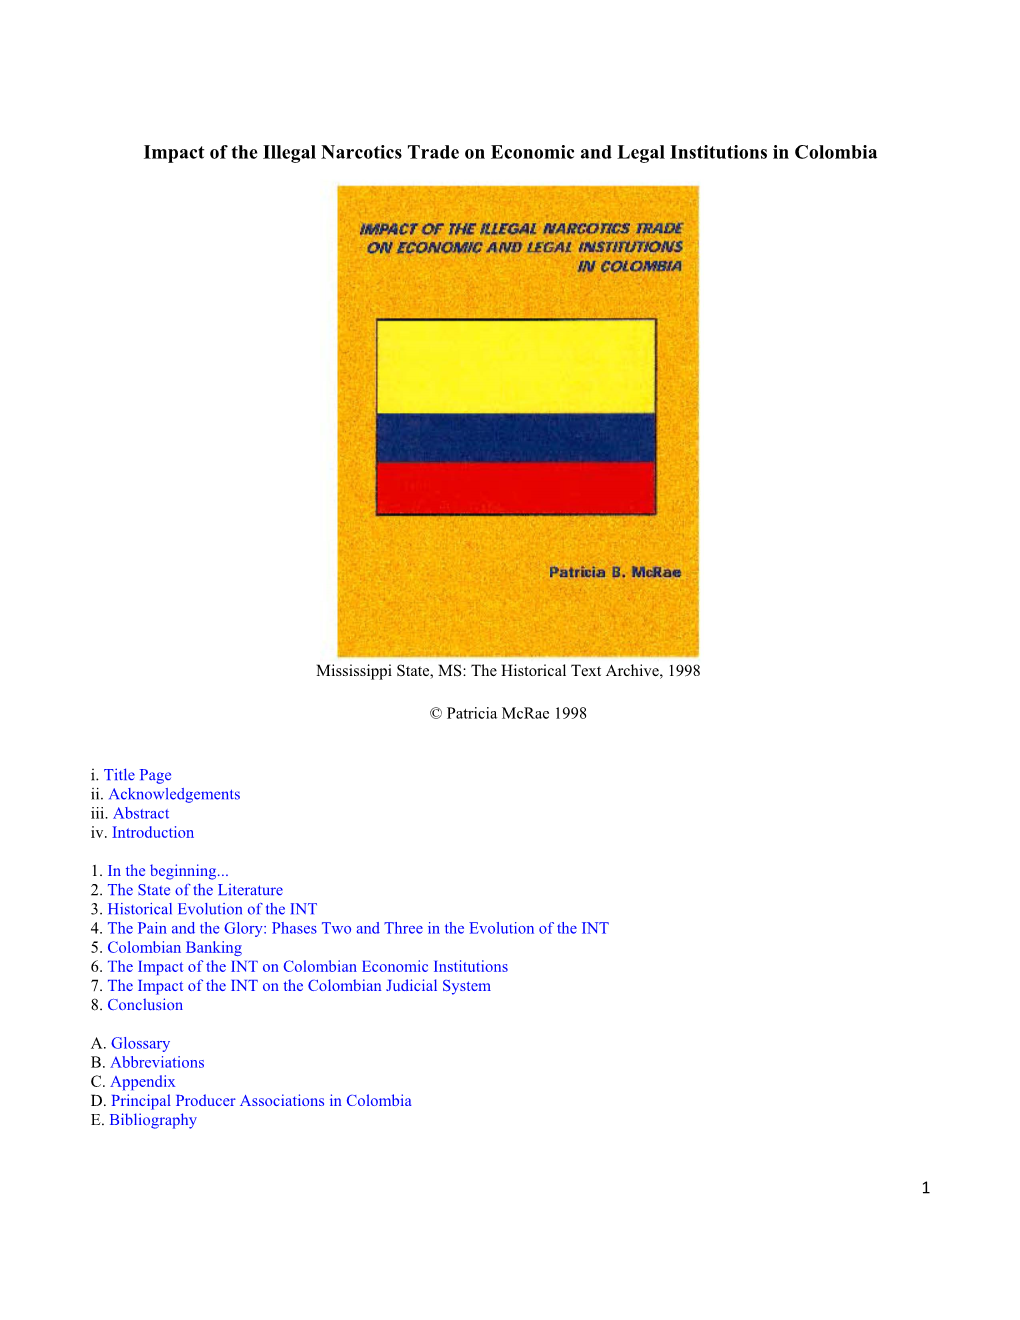 Impact of the Illegal Narcotics Trade on Economic and Legal Institutions in Colombia